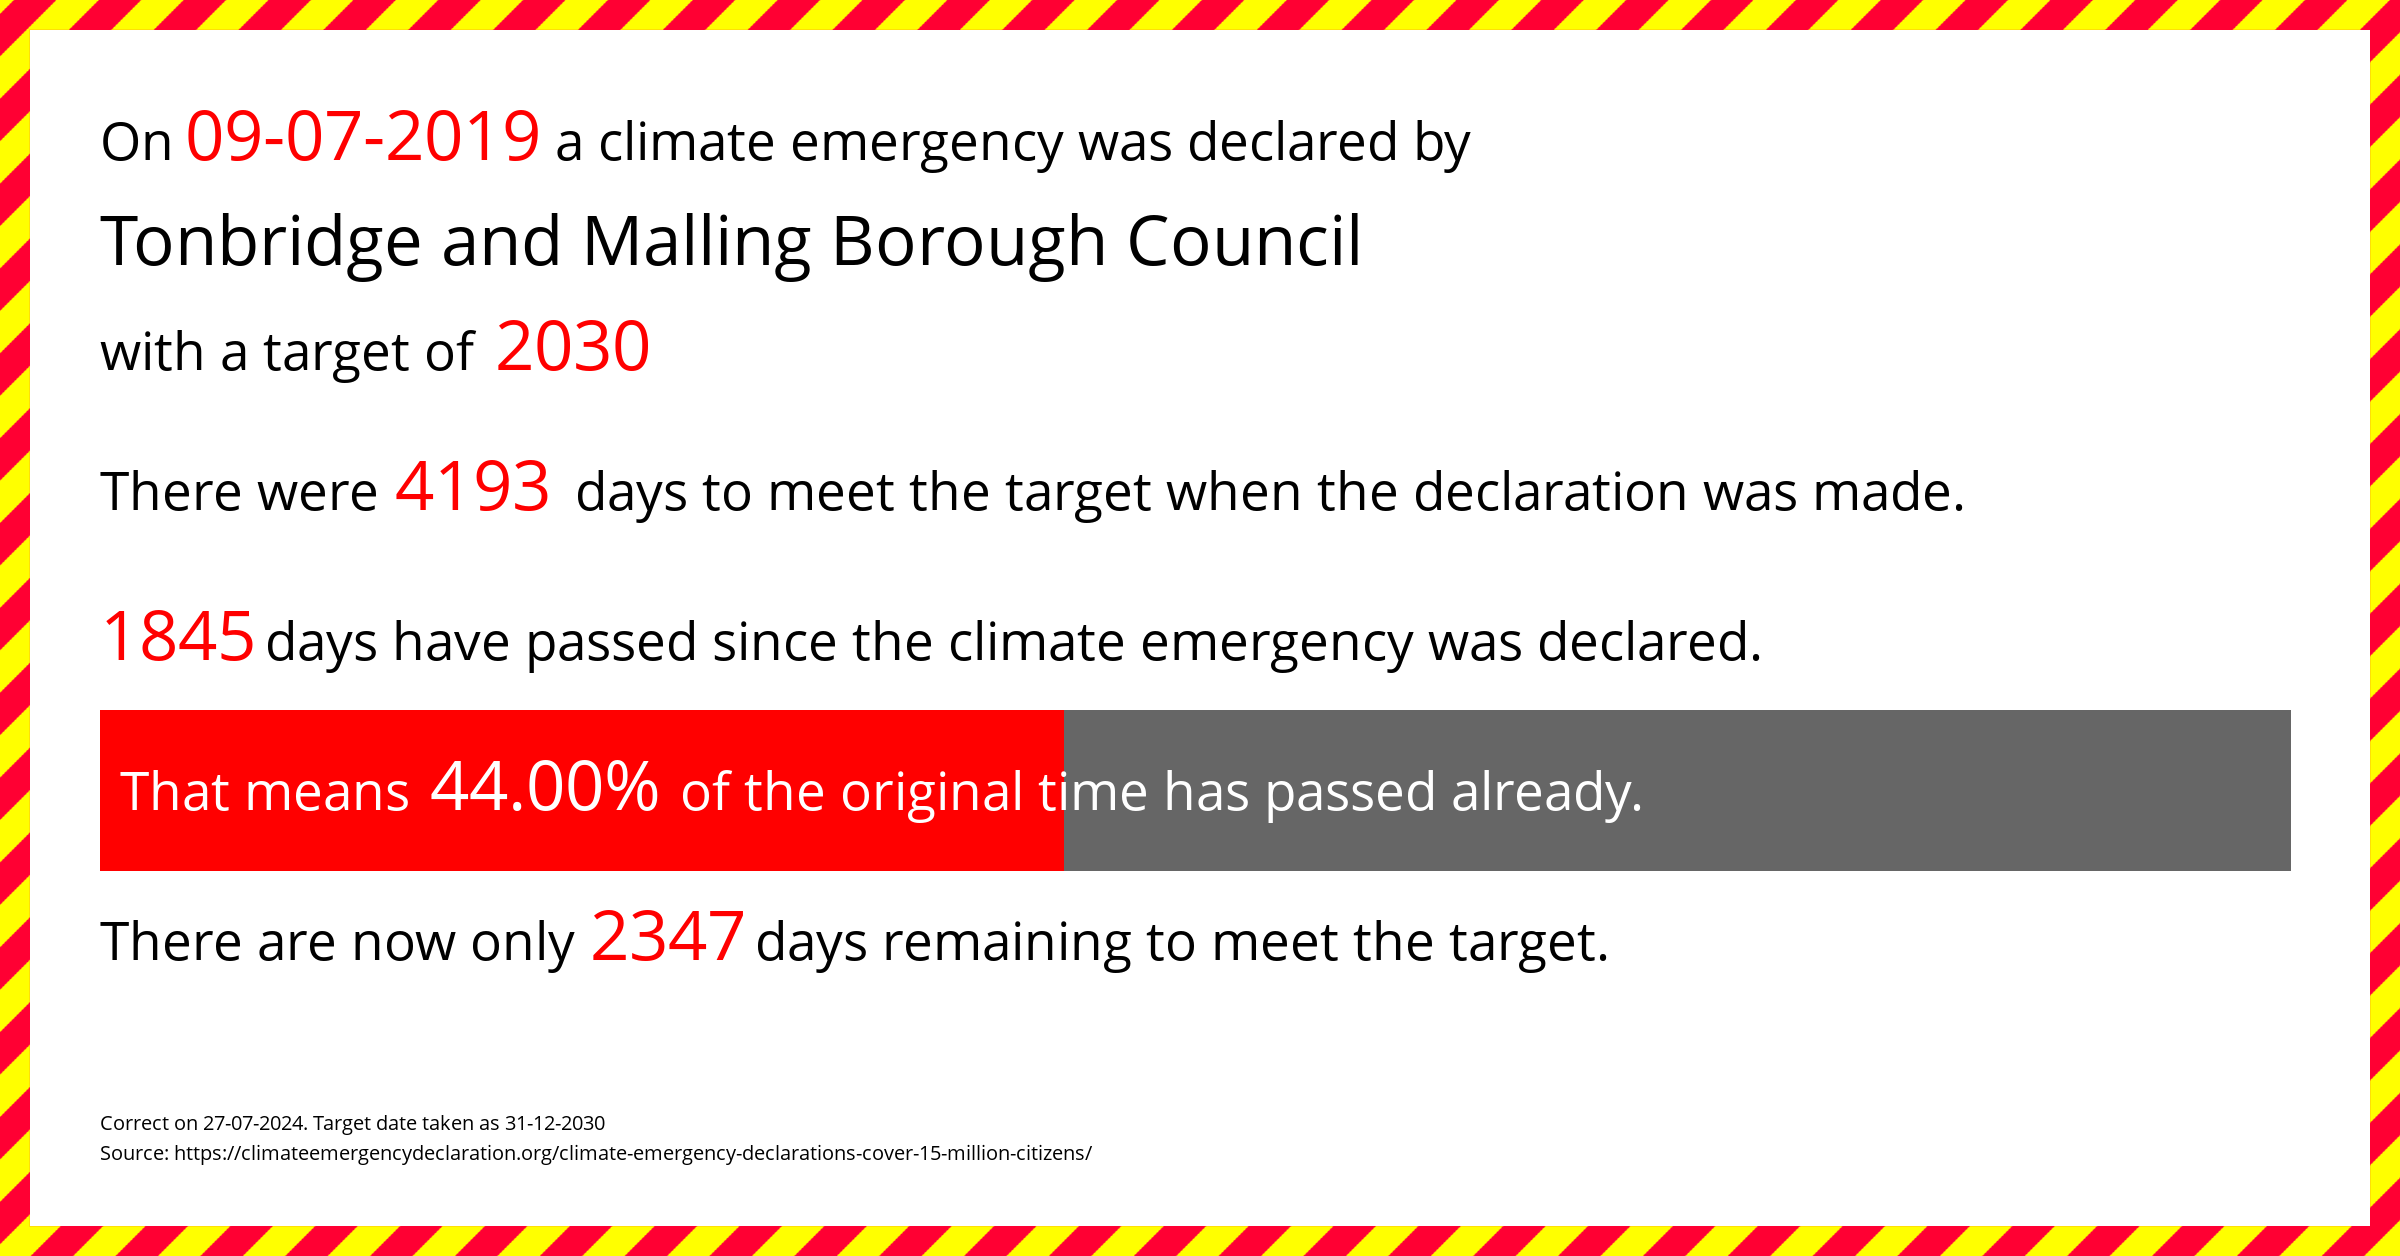 Tonbridge and Malling Borough Council declared a Climate emergency on Tuesday 9th July 2019, with a target of 2030.